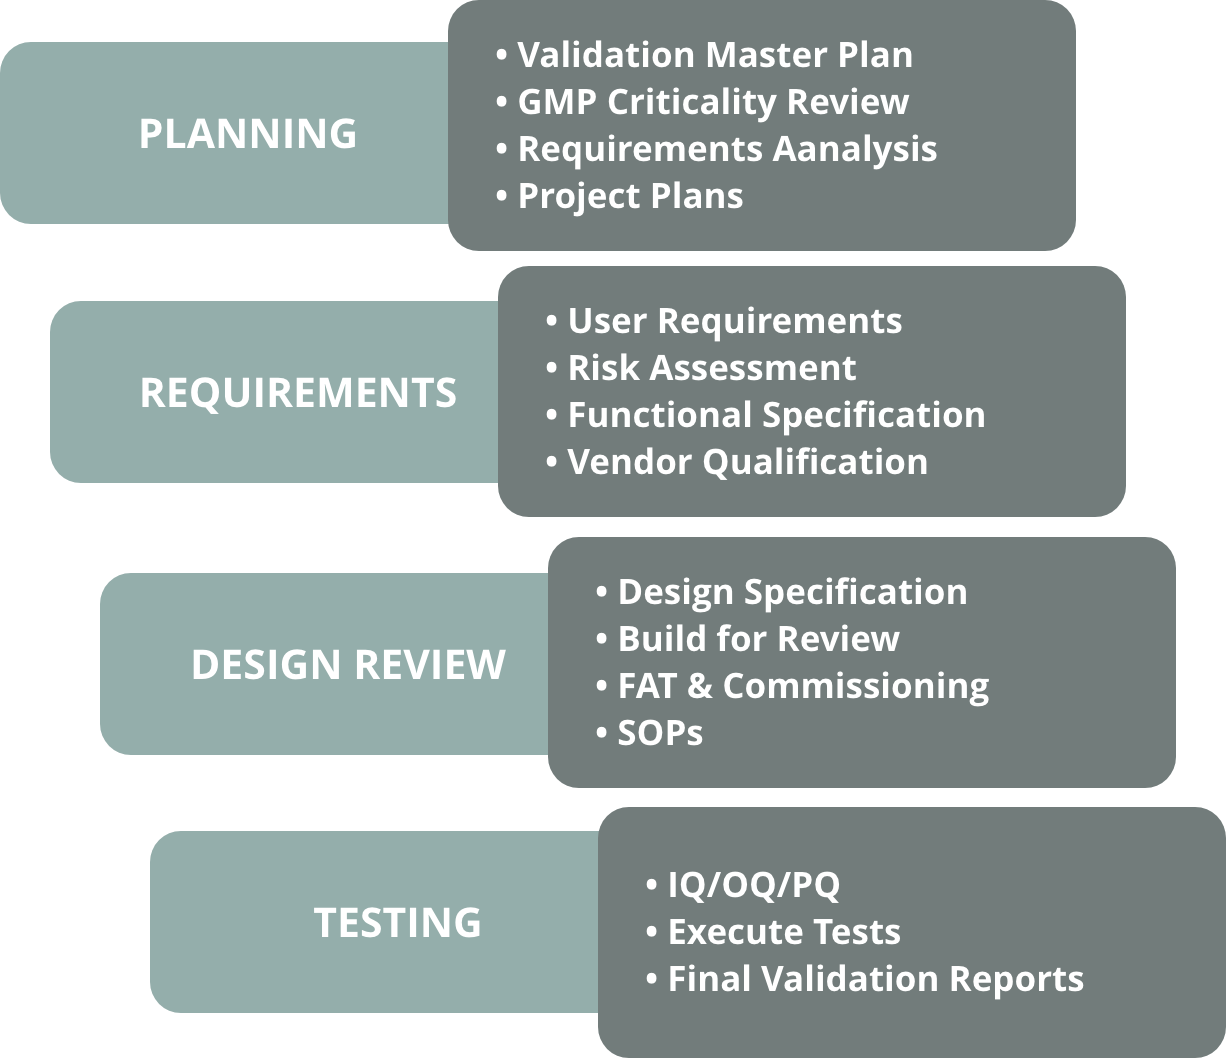 Validation engineering: validation master plan, GMP criticality review, requirements analysis, user requirements, risk assessment, functional specification, vendor qualification, design specification, SOP, IQ, OQ, and PQ.